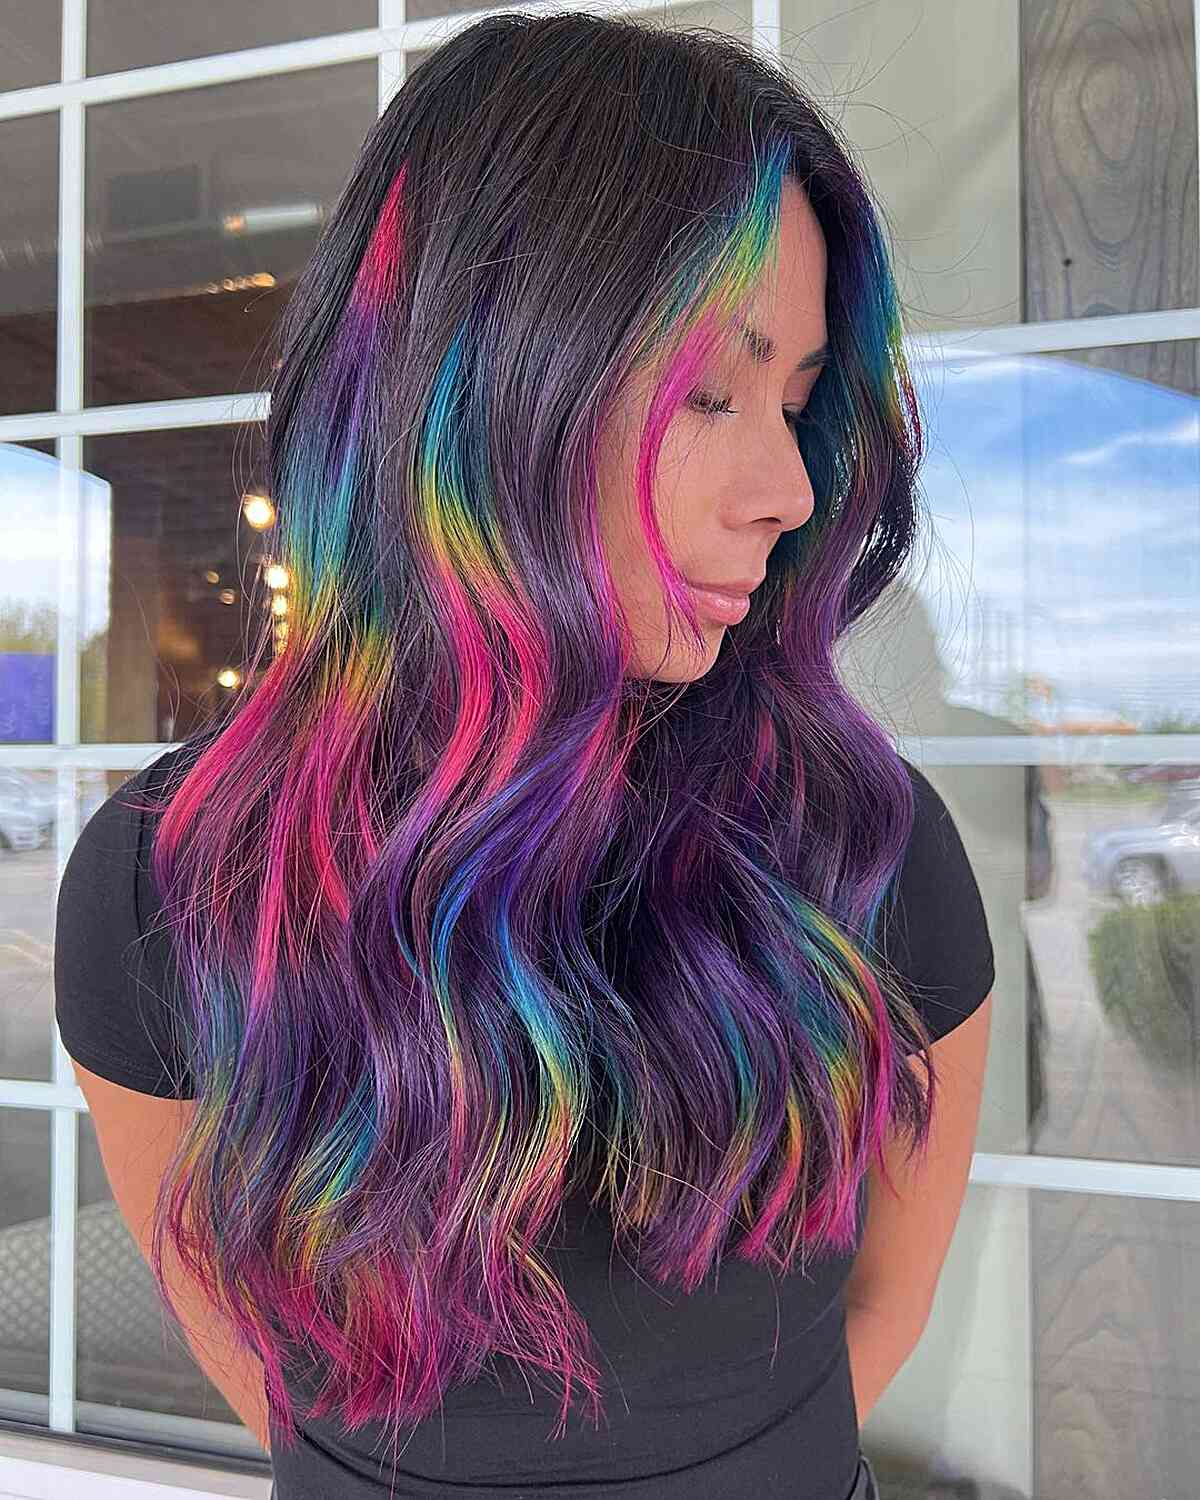 Long Dark Hair with Face-Framing Holographic Highlights